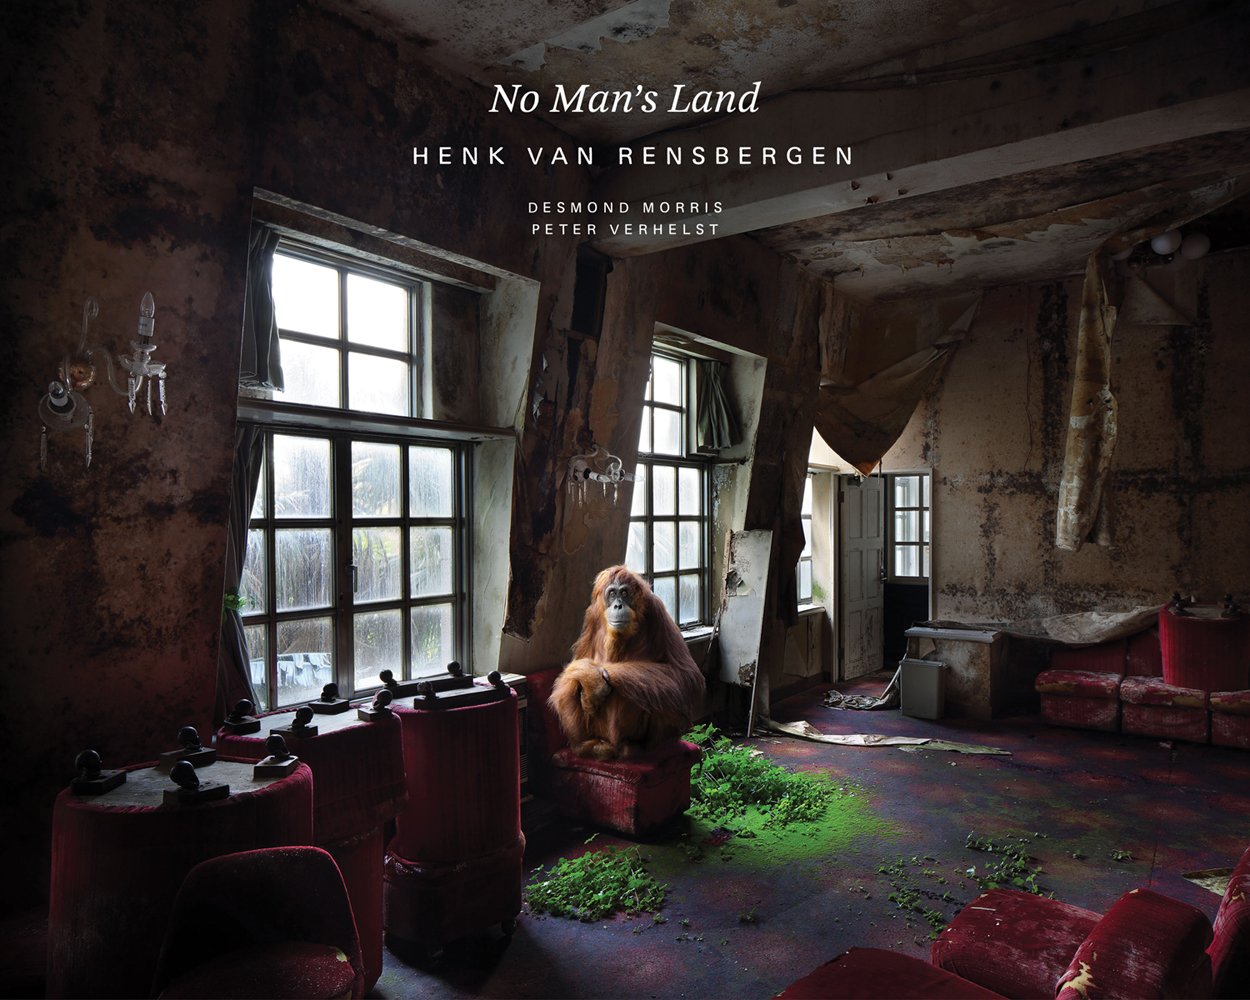 Orangutan sitting on old red theatre seat in abandoned building, on cover of 'No Man's Land', by Lannoo Publishers.